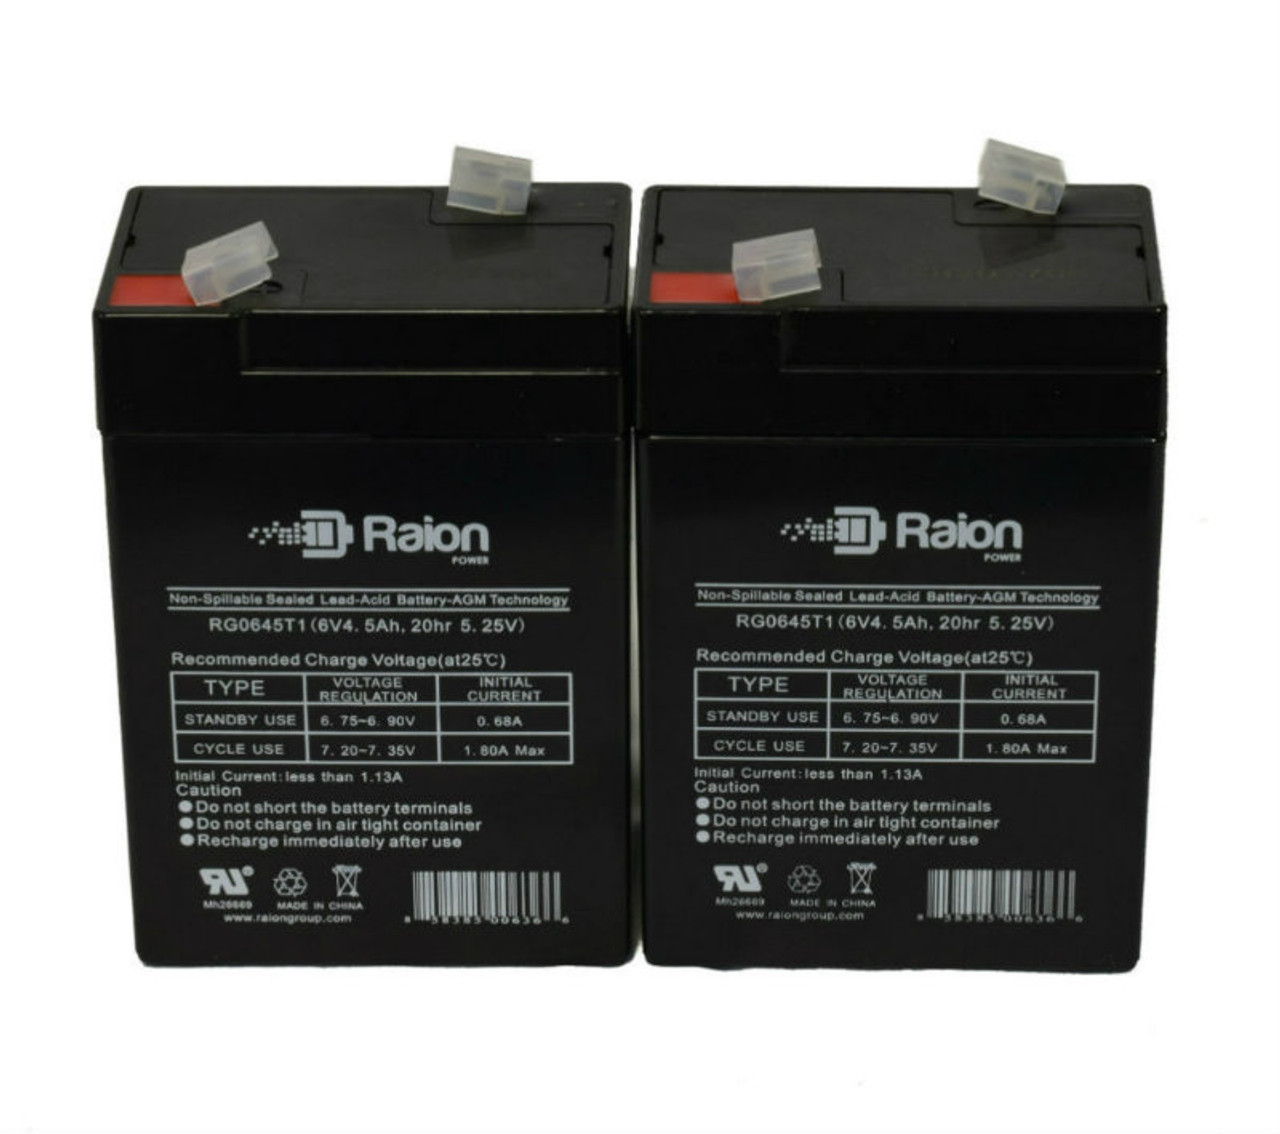 Raion Power 6V 4.5Ah Replacement Emergency Light Battery for Dual-Lite HCXUGB - 2 Pack